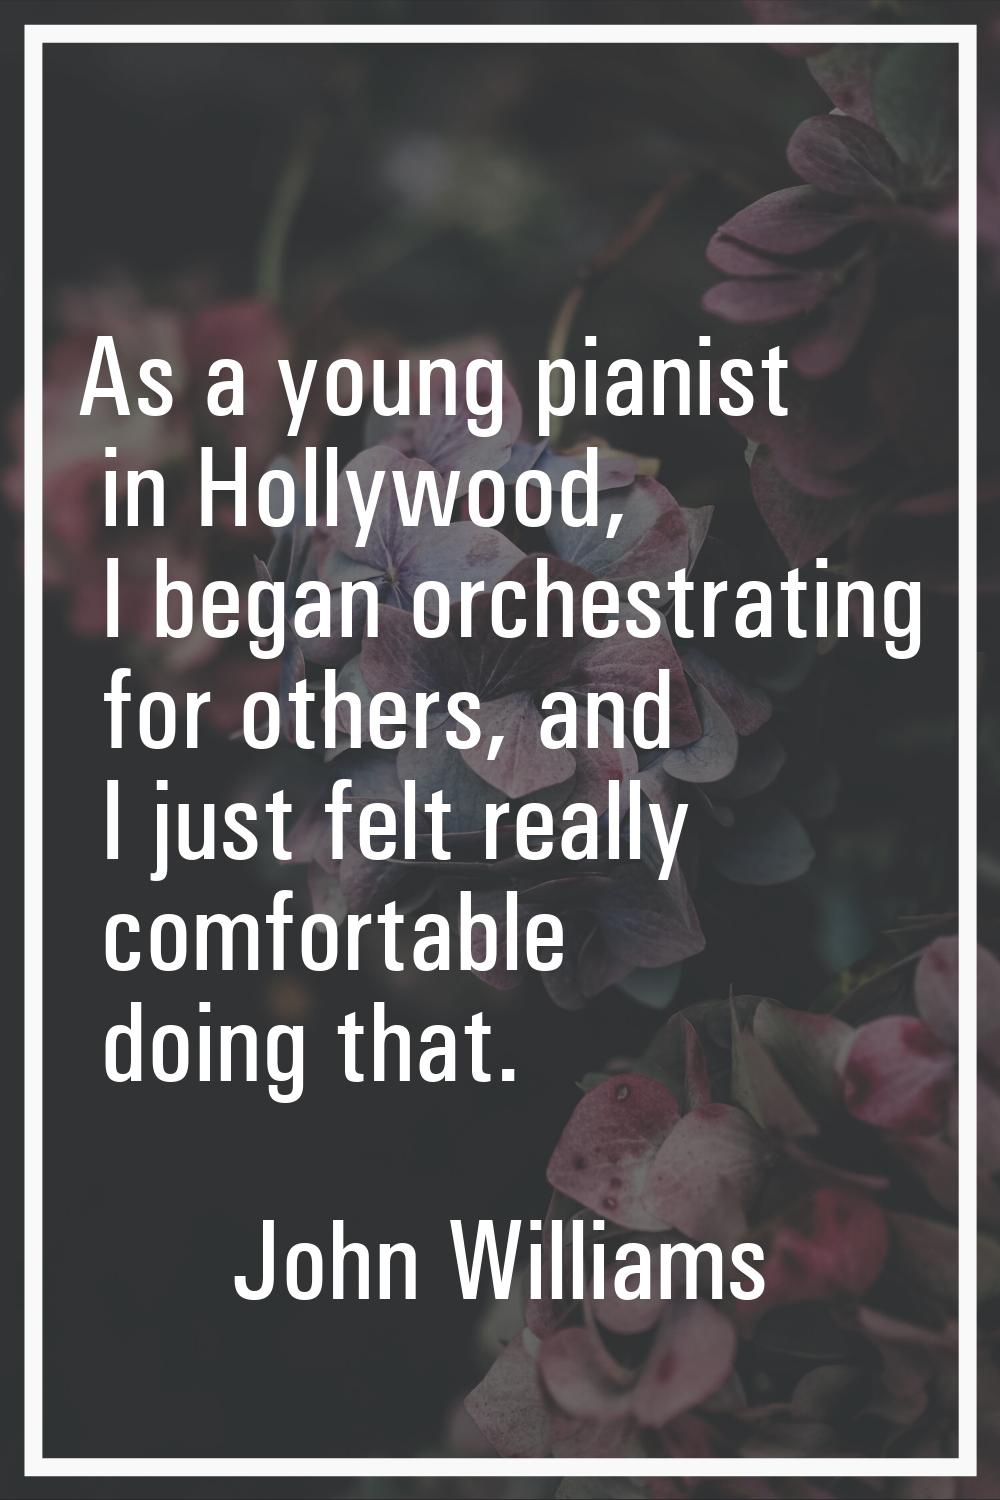 As a young pianist in Hollywood, I began orchestrating for others, and I just felt really comfortab